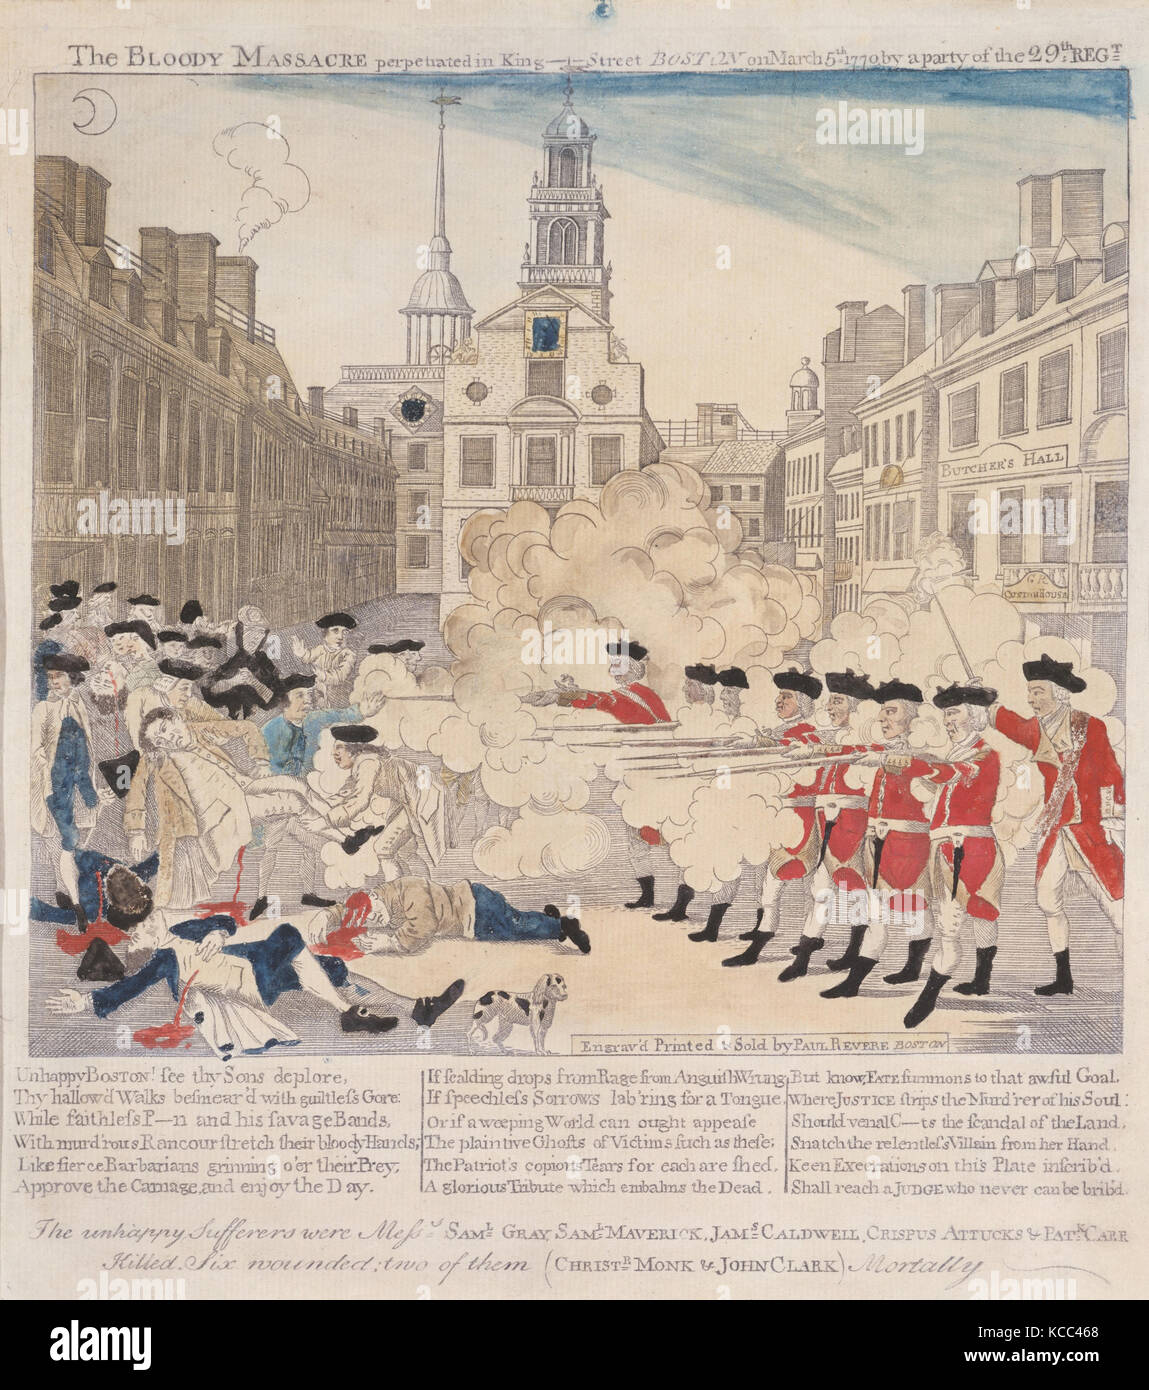 The Boston Massacre, 1770, Engraving and etching, hand colored, image: 10 1/4 x 9 1/8 in. (26 x 23.2 cm), Prints, Paul Revere Stock Photo